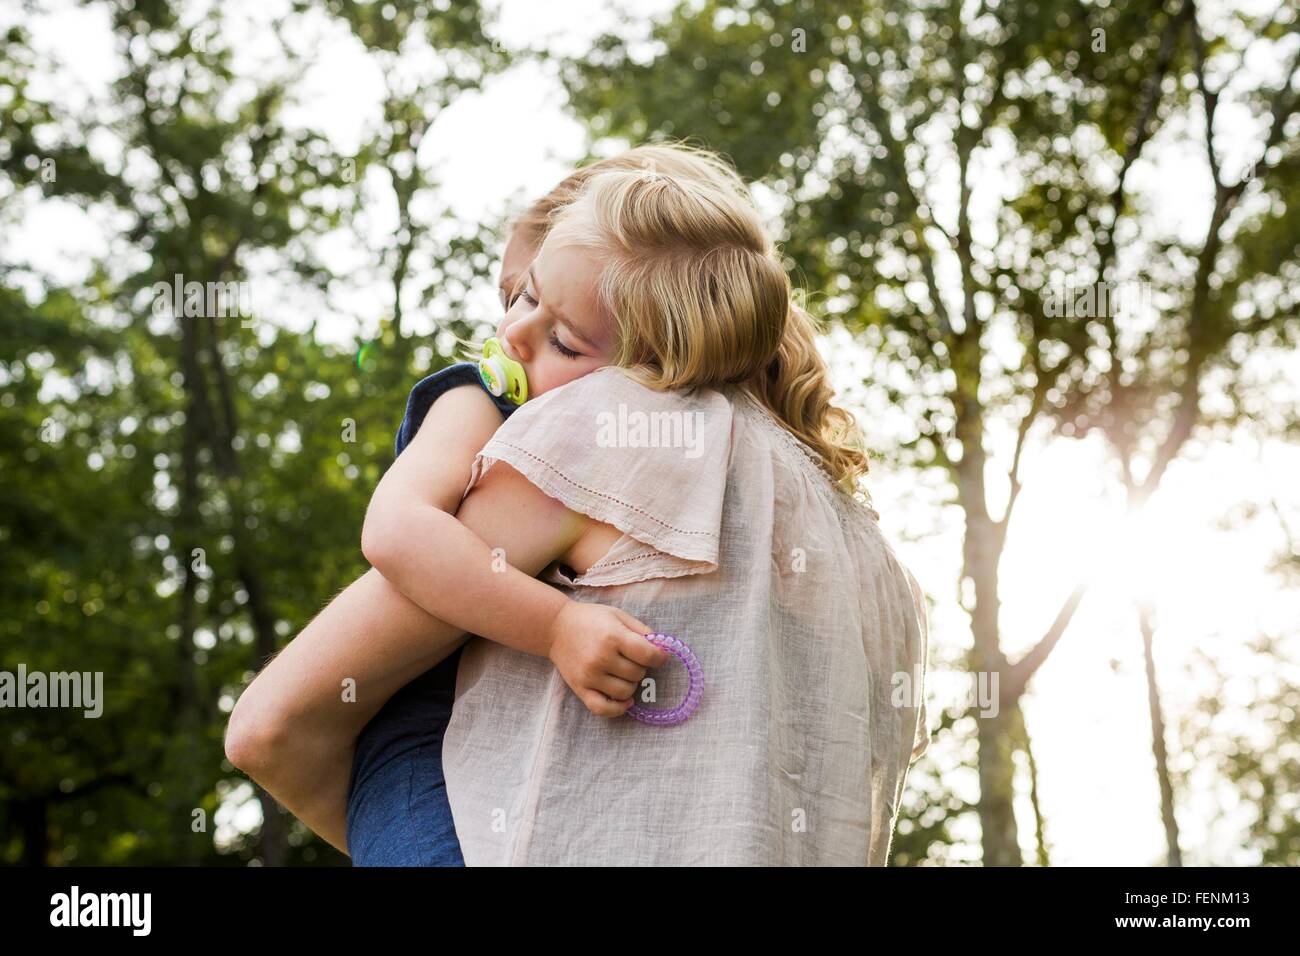 Mid adult woman carrying sleeping daughter in park Stock Photo